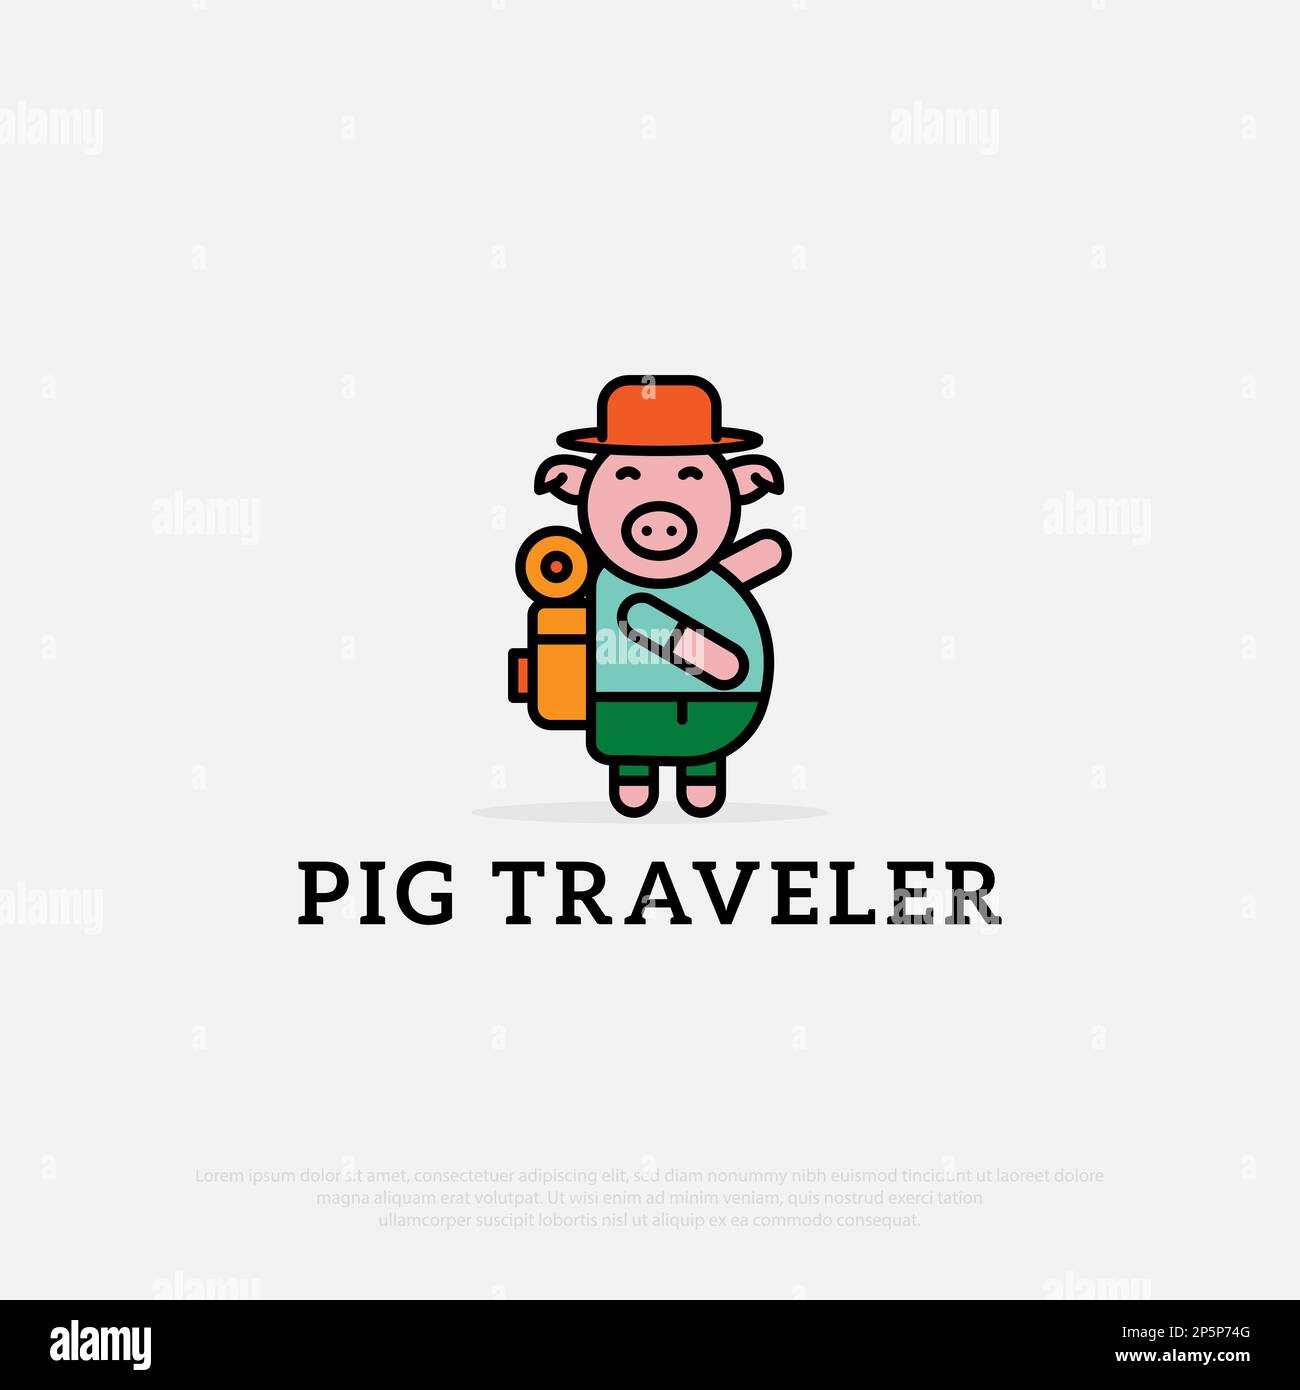 Pink piggy bank wear hat with travel bag logo designs . The creative concept of traveling. cute animal cartoon vector flat style illustration Stock Vector